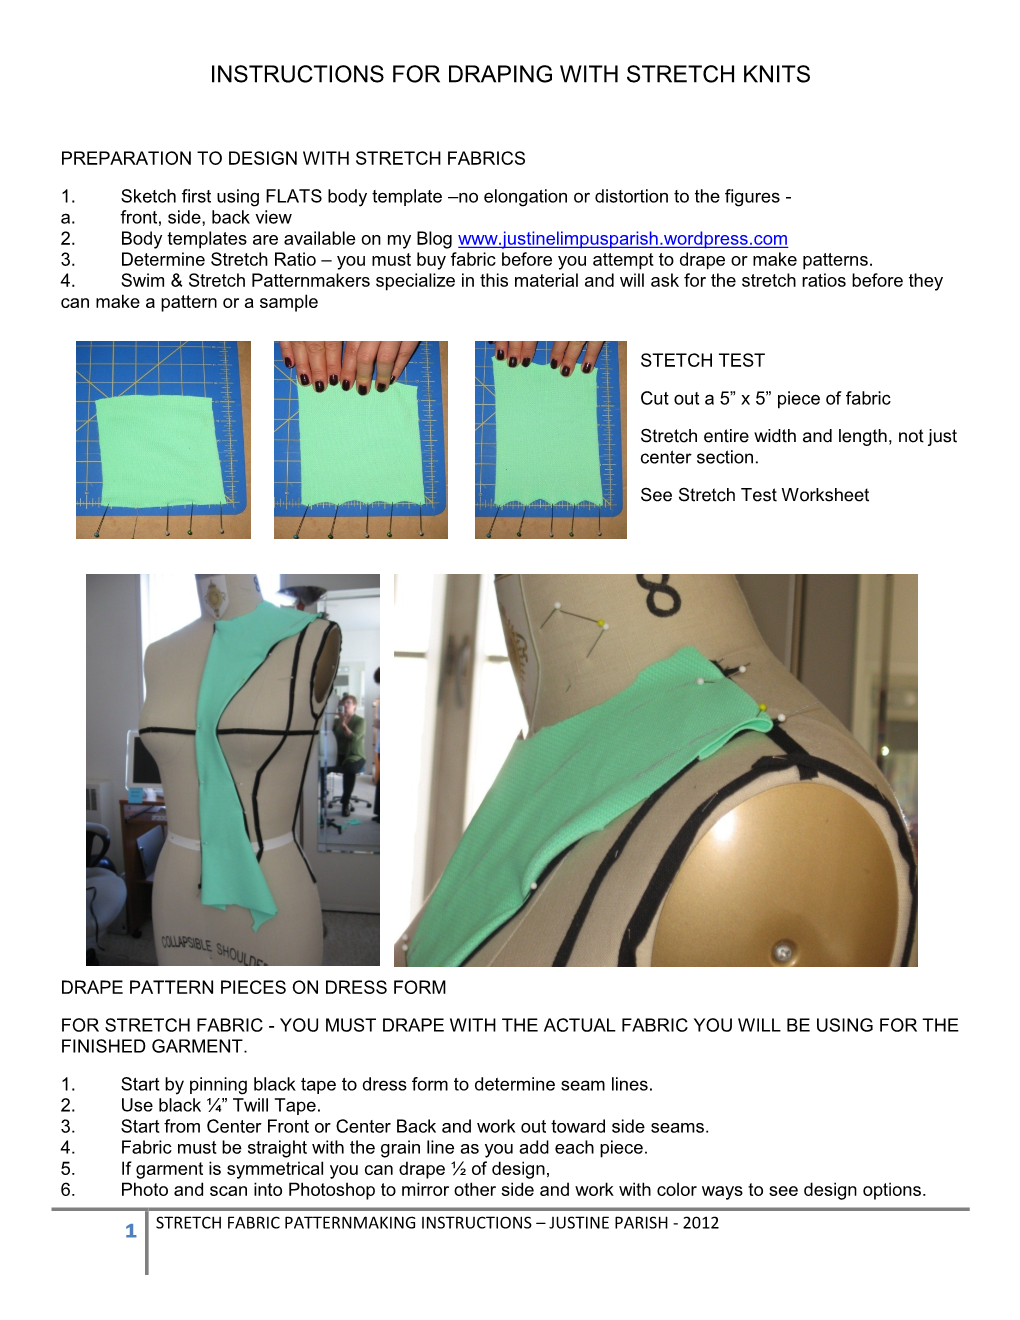 Instructions for Draping with Stretch Knits